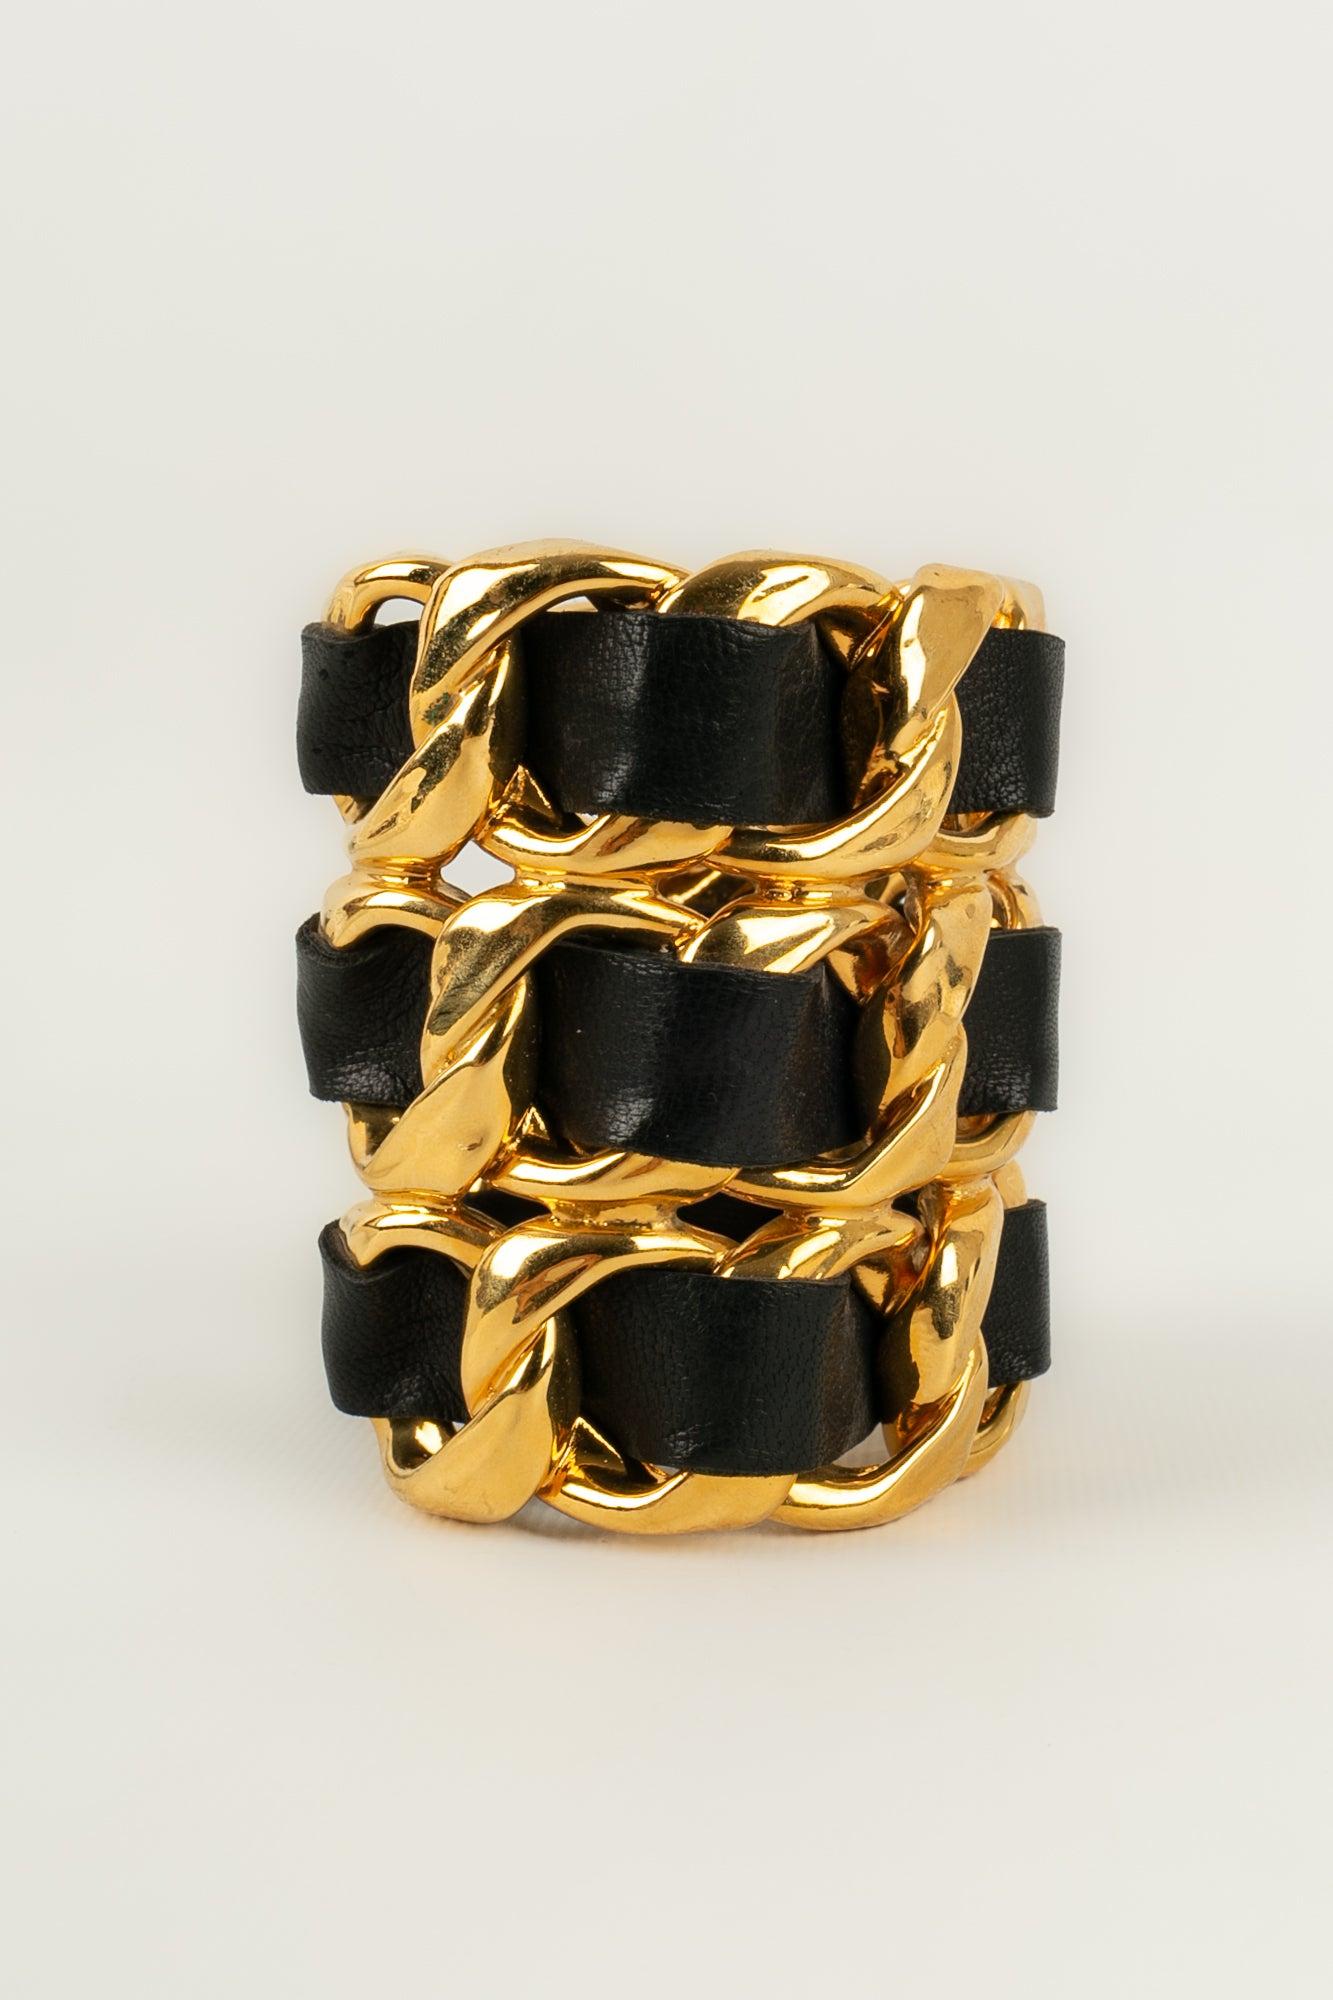 Chanel Cuff Bracelet in Golden Metal and Black Leather For Sale 1